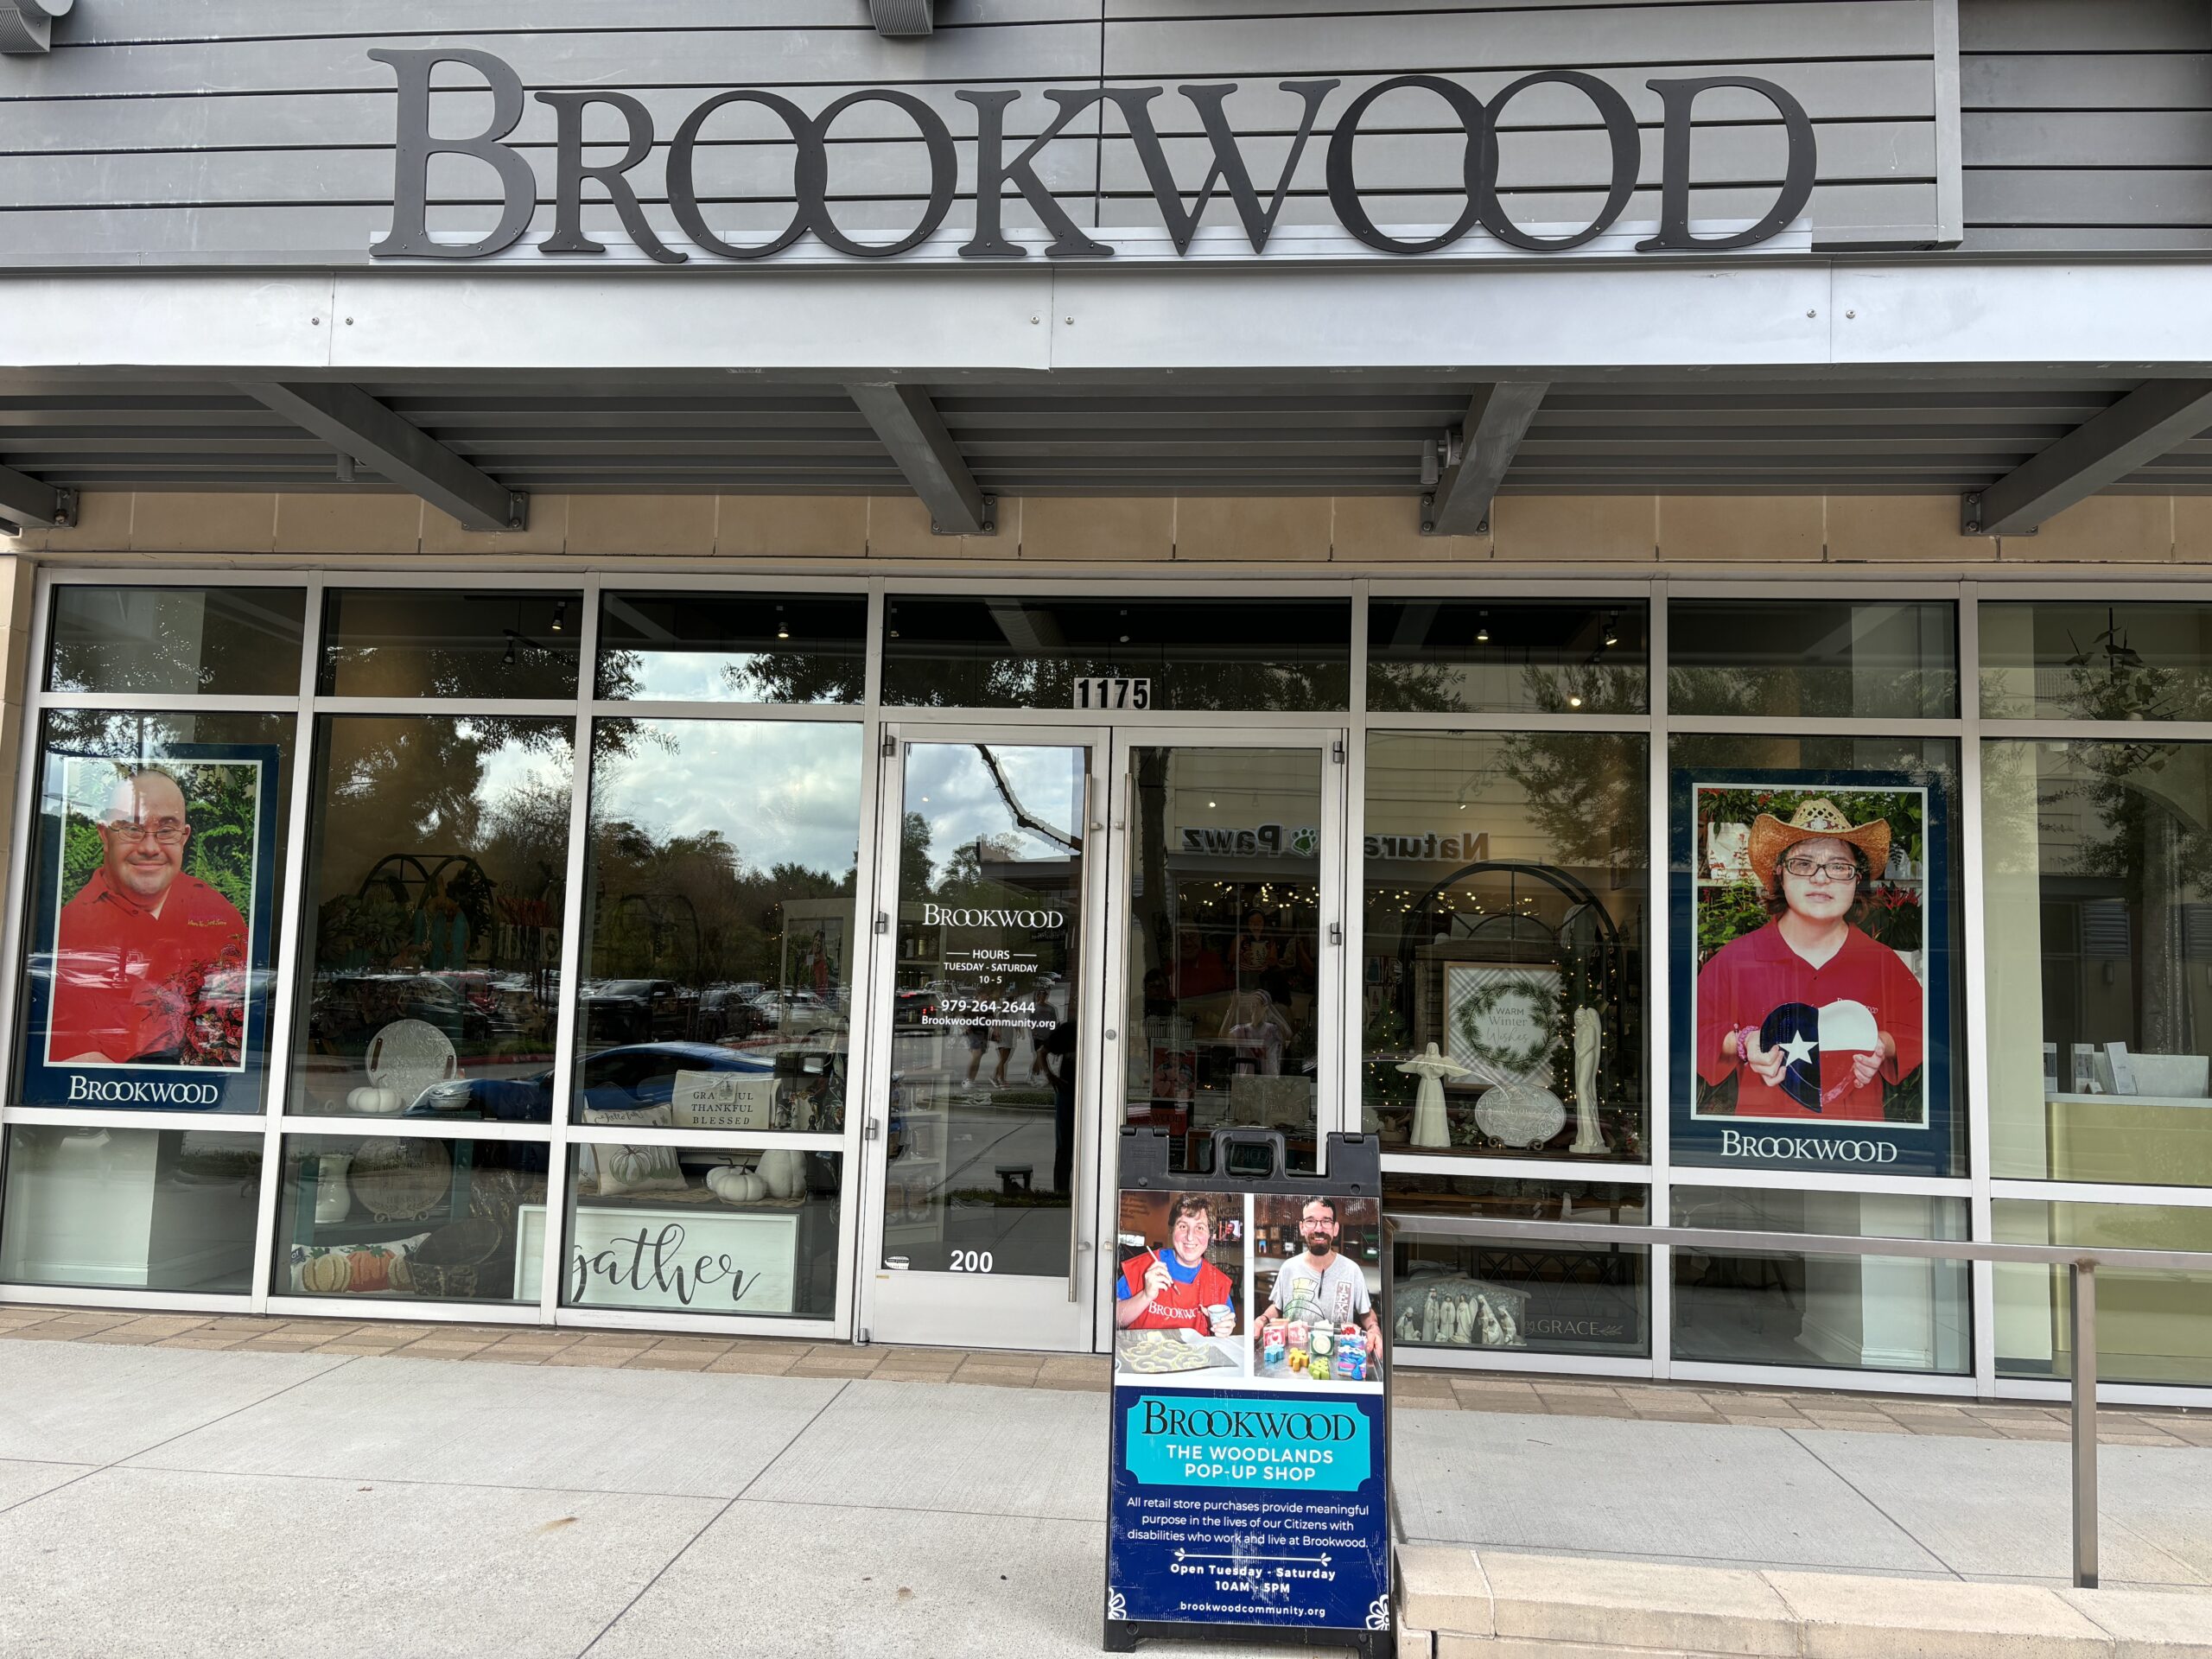 Brookwood makes for some feel-good holiday shopping in The Woodlands. (Photo by Laura Landsbaum)